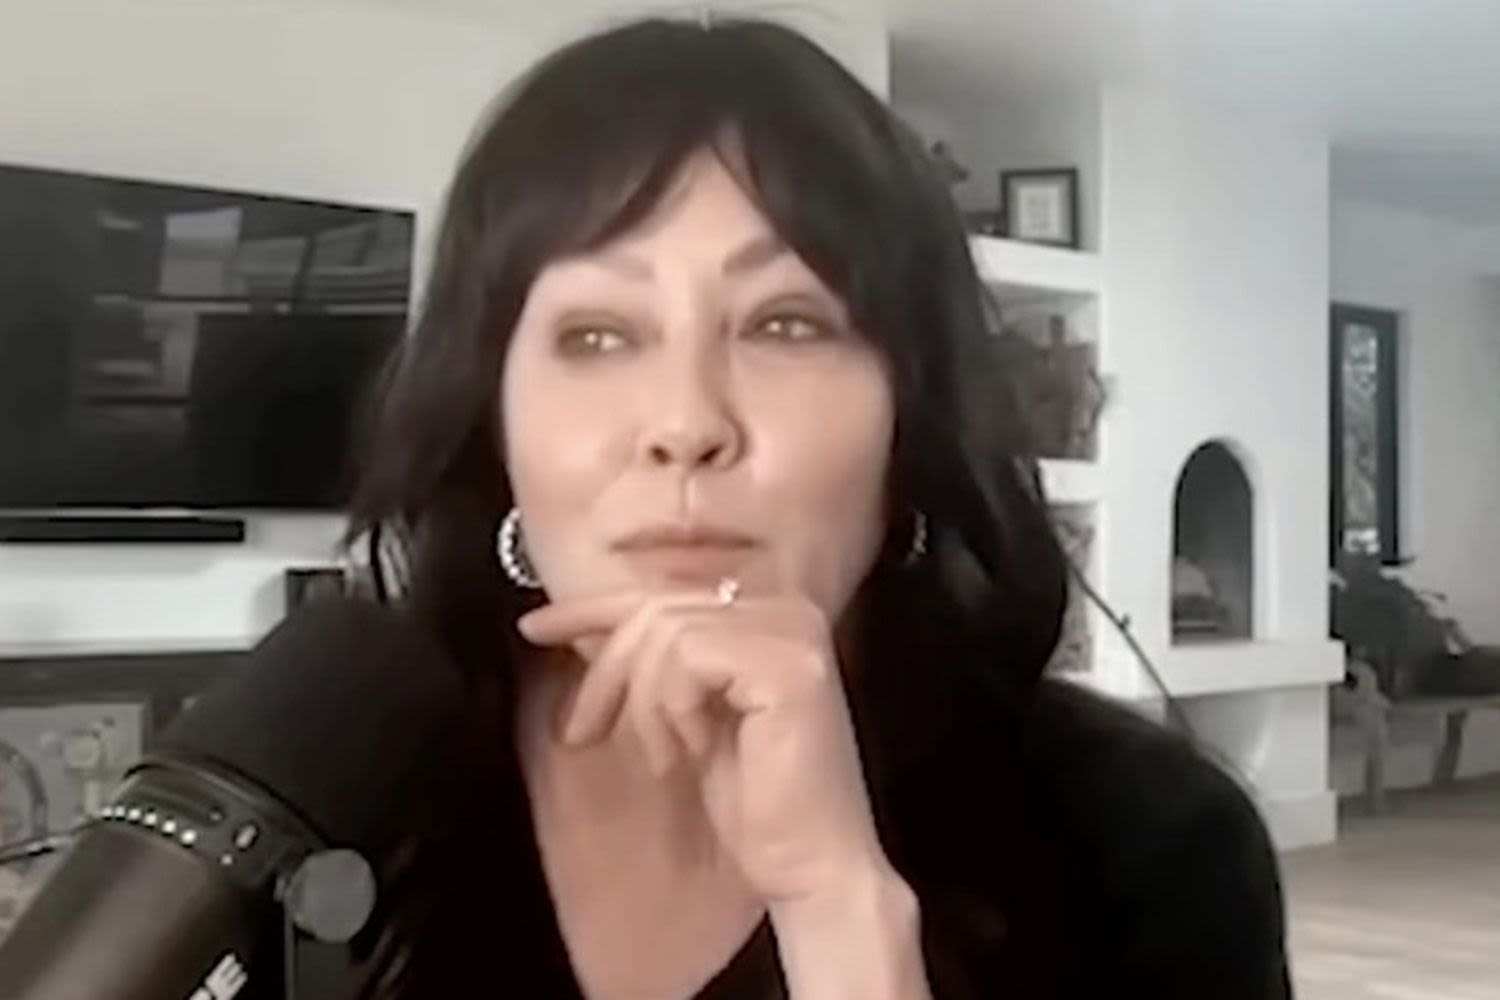 Shannen Doherty Said Working, Filming 3 Podcast Episodes a Day Left 'No Room for Depression' Before Her Death